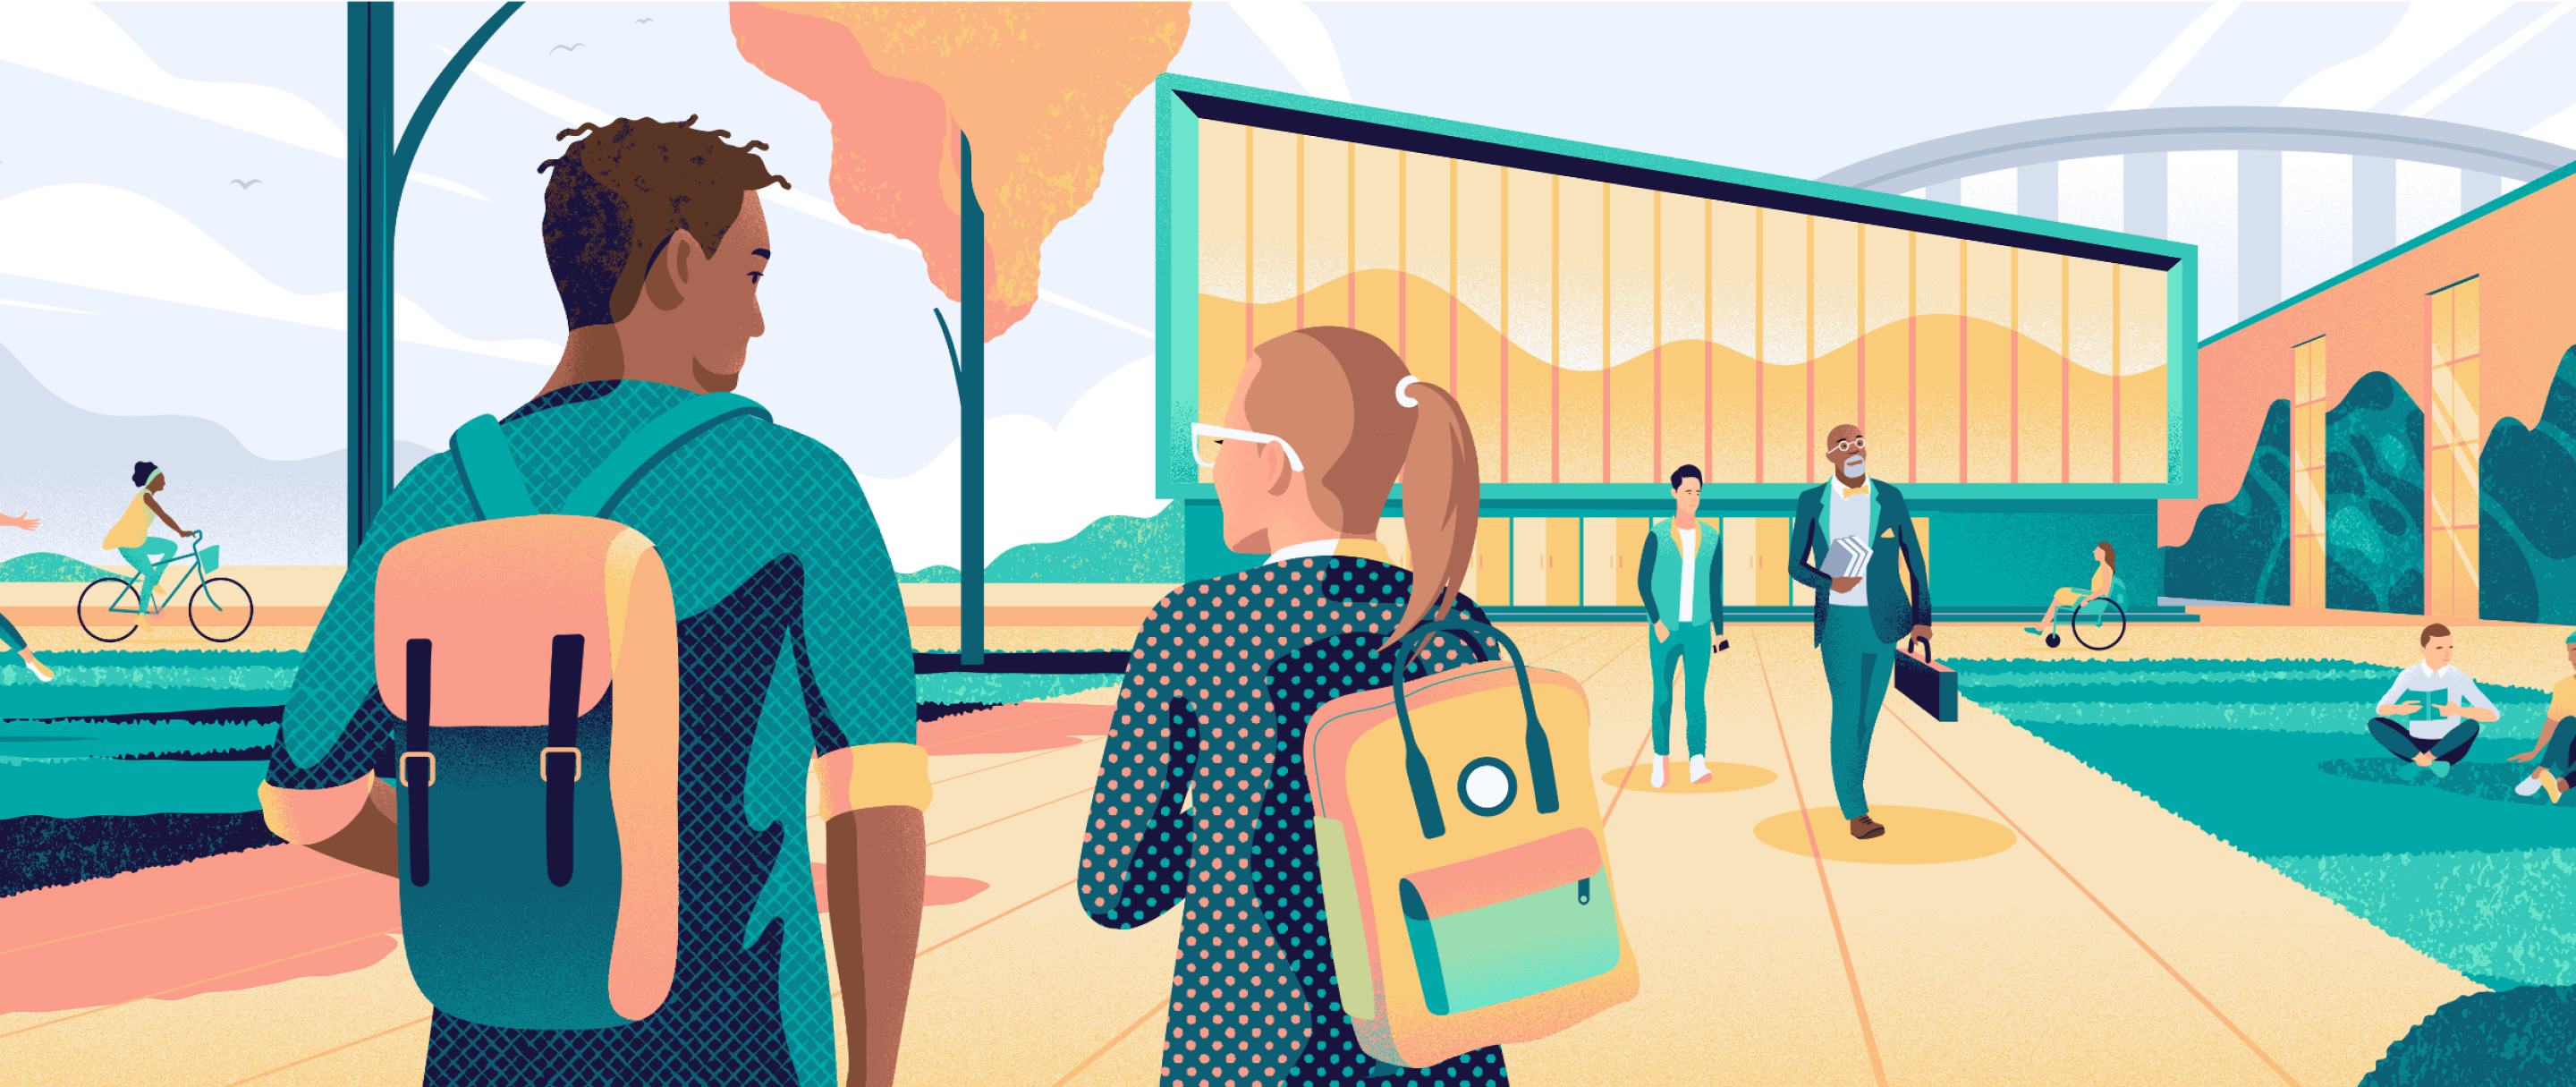 Illustration of two students wearing backpacks walking outside past other students